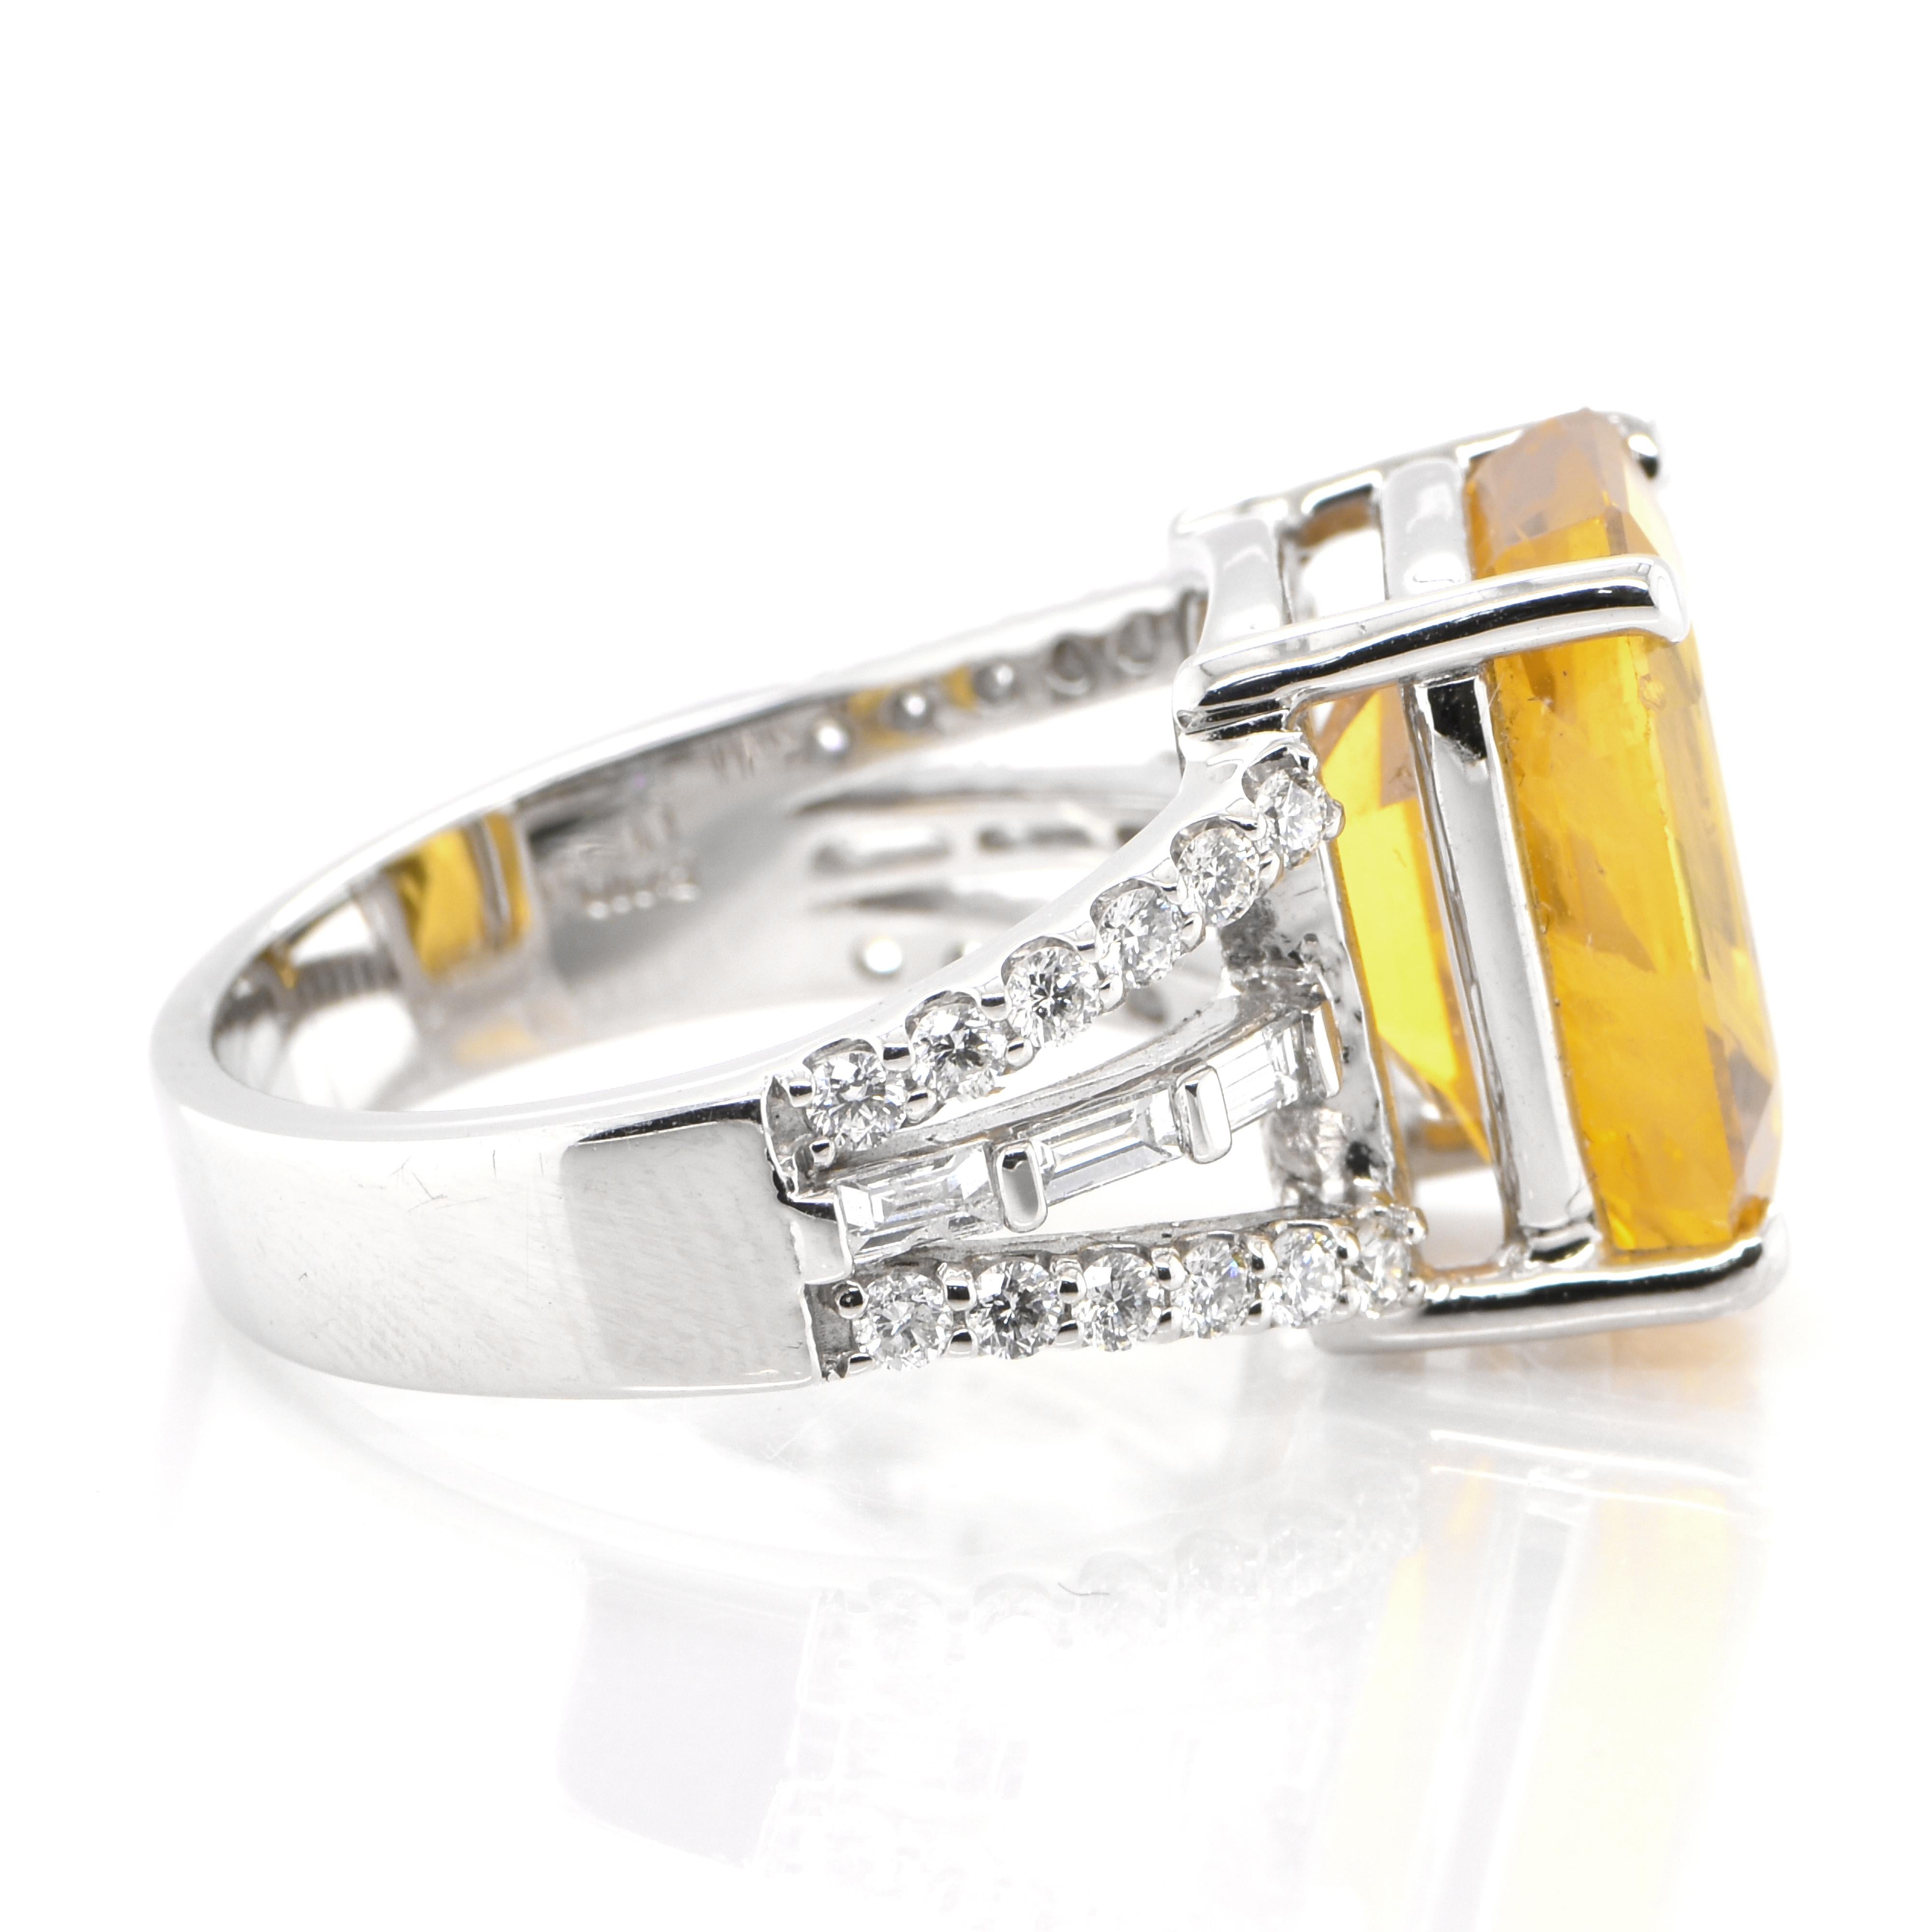 Modern GIA Certified 9.78 Carat Natural Yellow Sapphire & Diamond Ring Set in Platinum For Sale